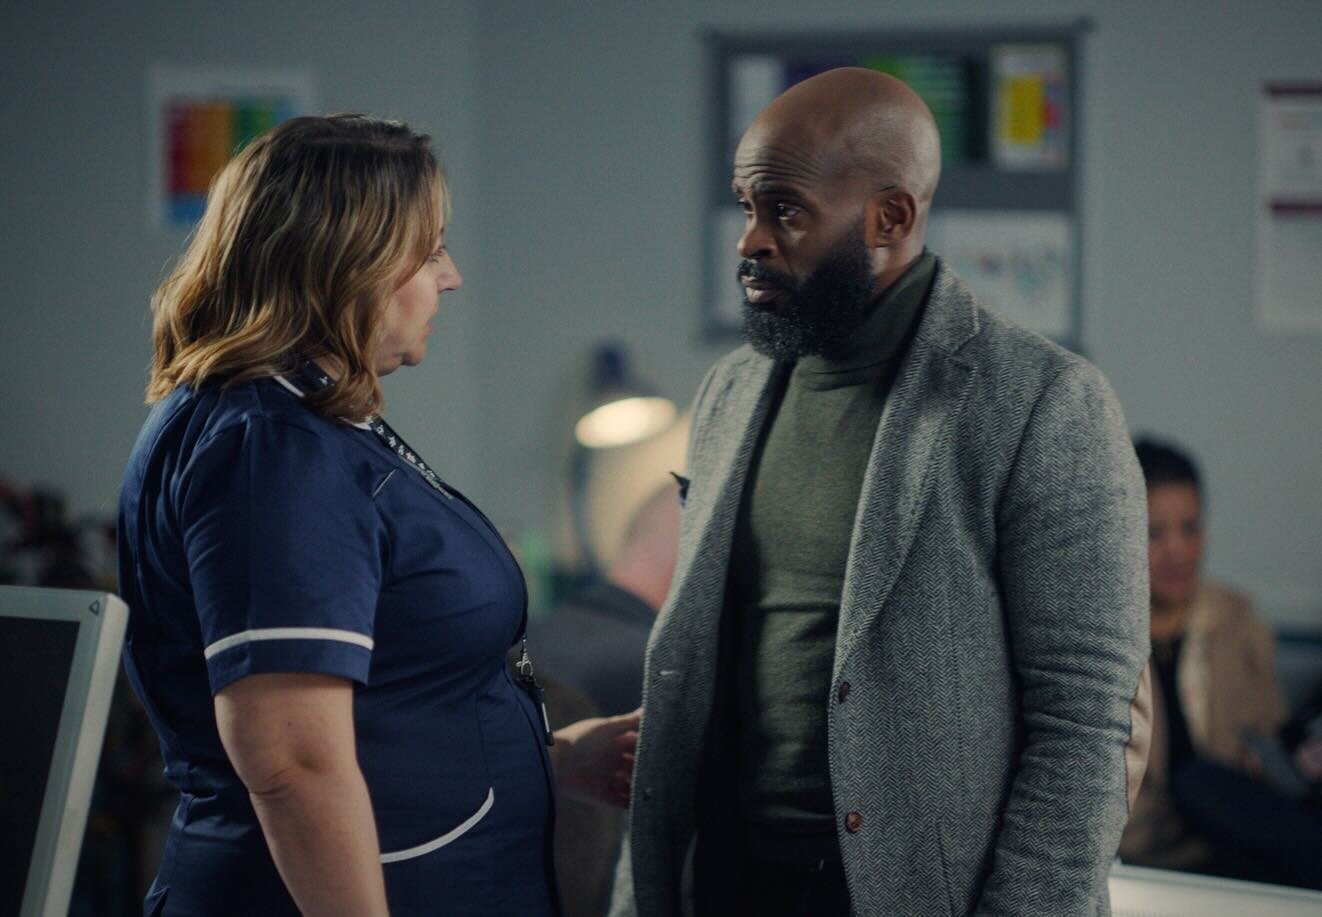 NHS // Prostate Cancer Awareness 
-
Serious subject ~ Fun shoot. Also, client were happy to go with Alexa OG delivery. One for the books 🤌🏾
-
agency. @rawlondonagency 
prod.  Blessing Alade
dir. @leejonesmedia 
dop. 🤙🏾
gaff. @writing.with.lightin